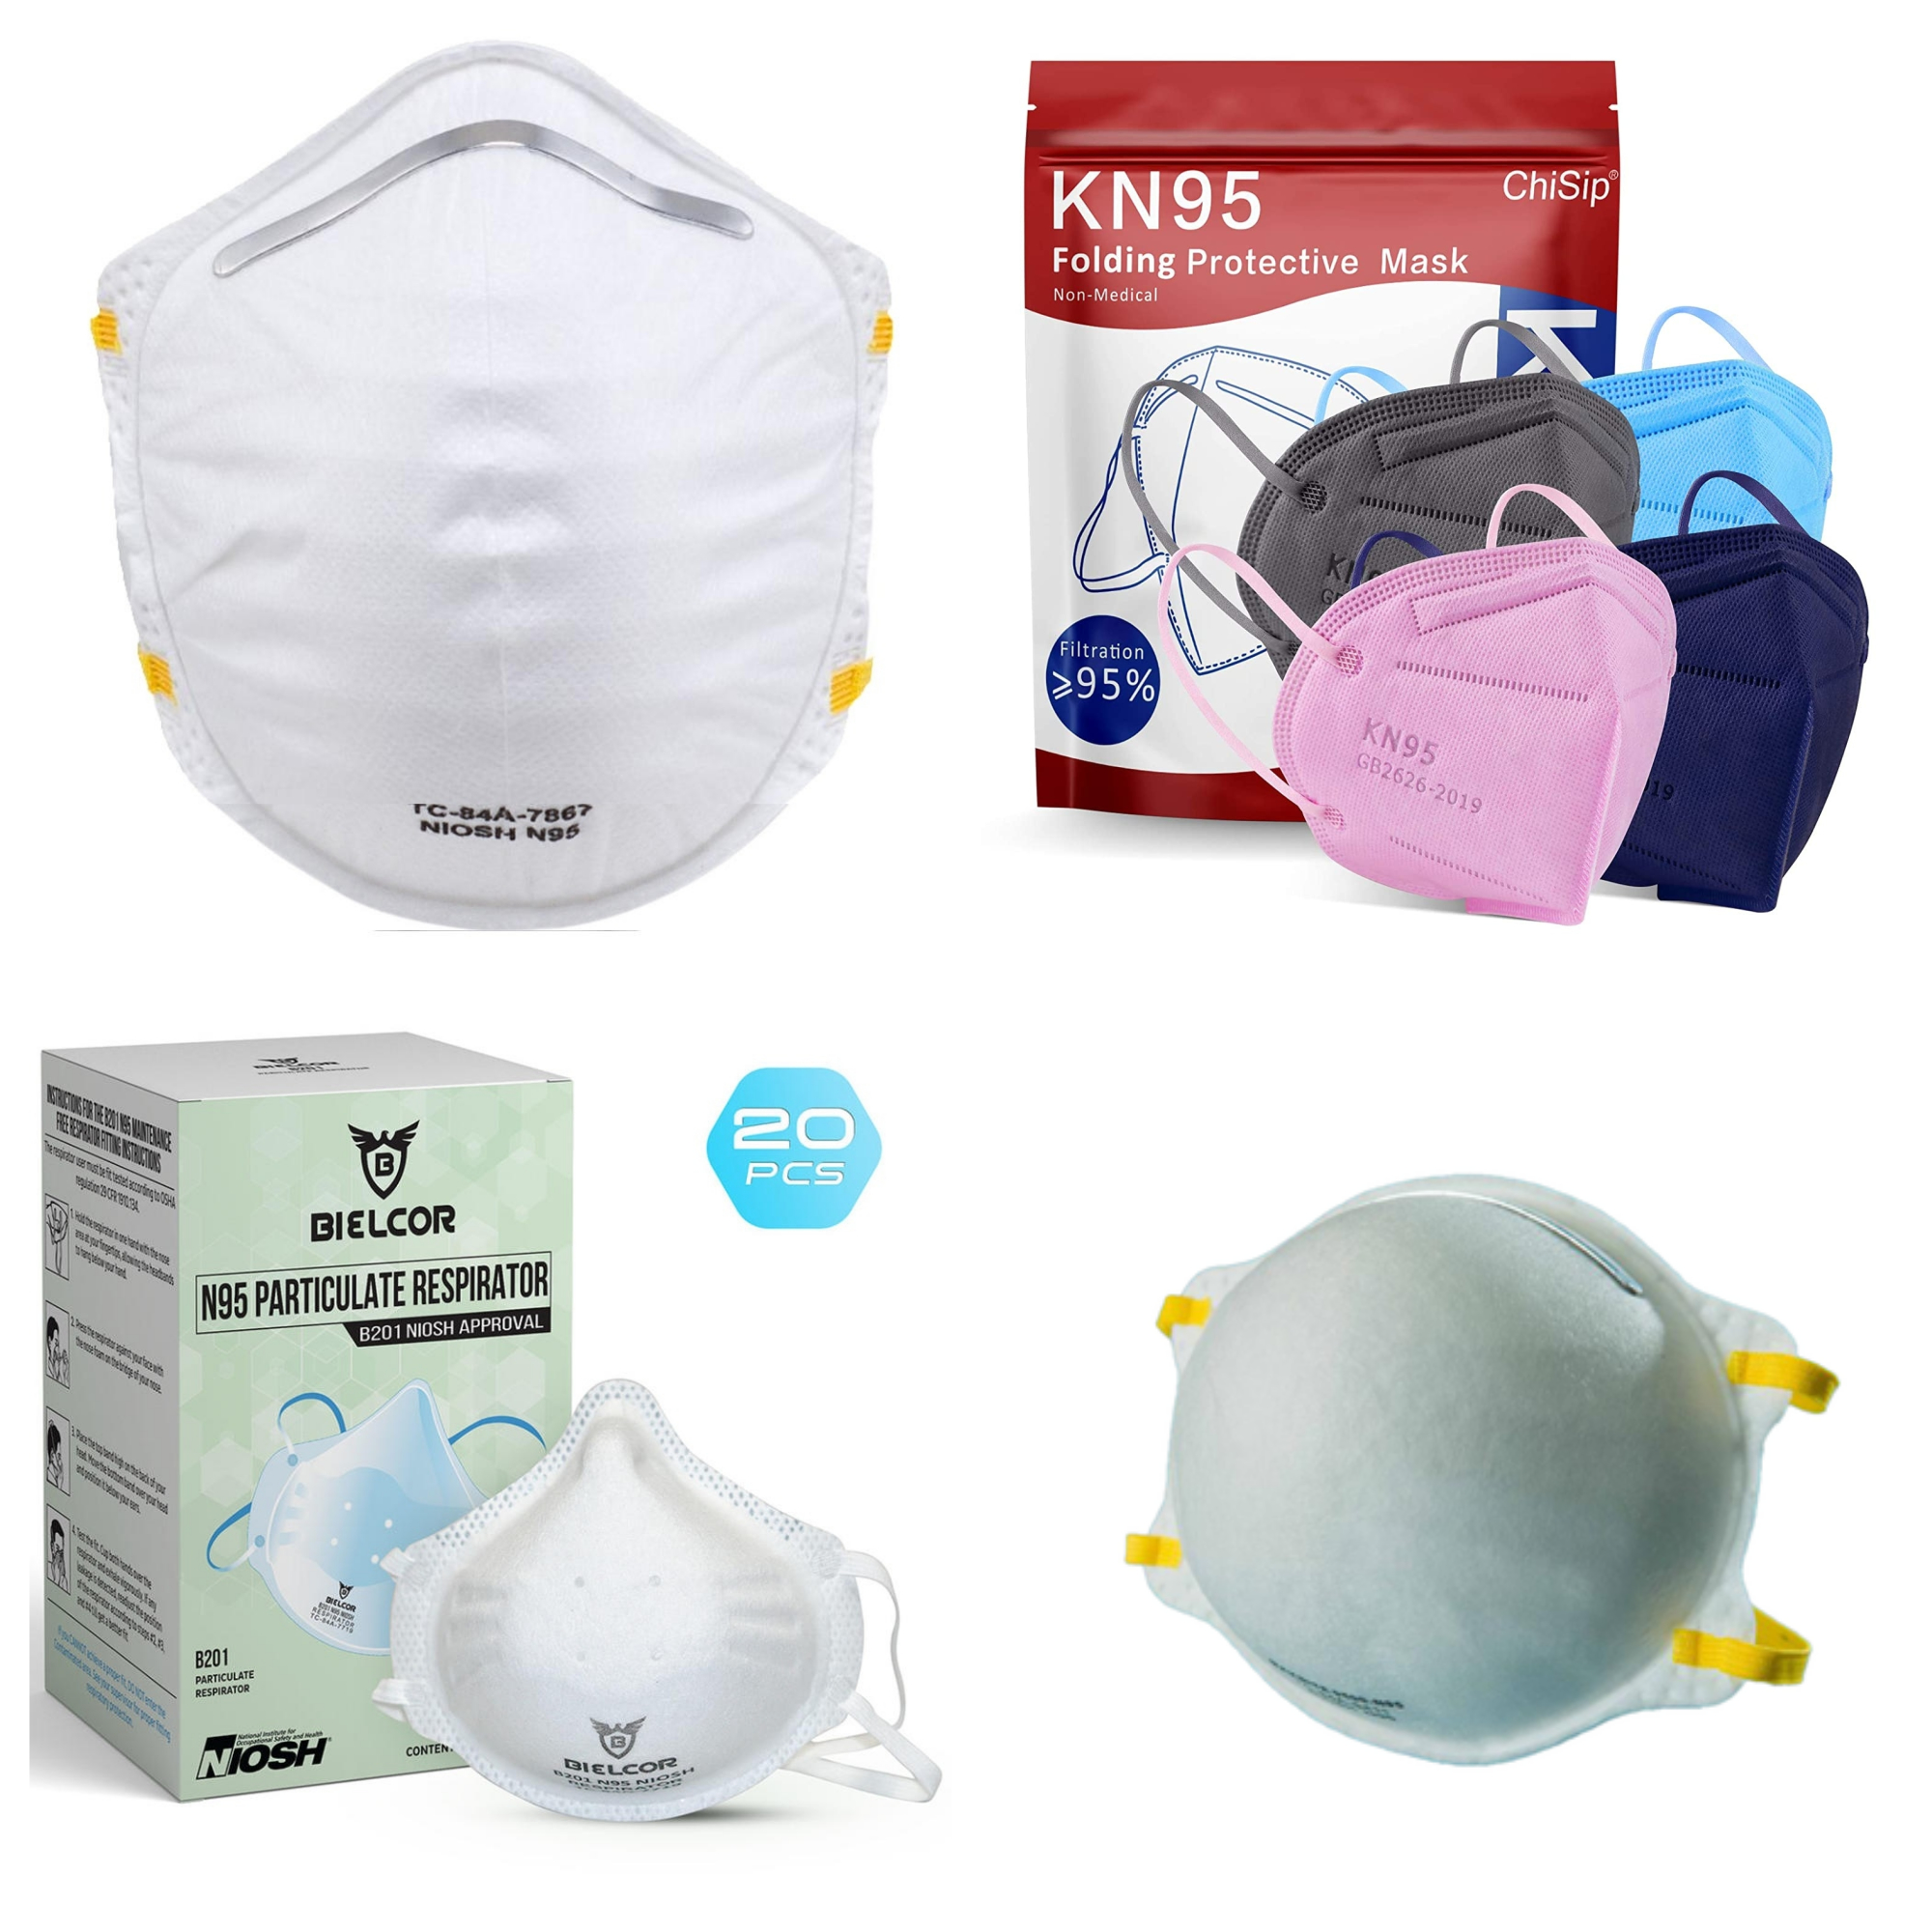 Where to buy N95, KN95 face masks to upgrade your coronavirus protection